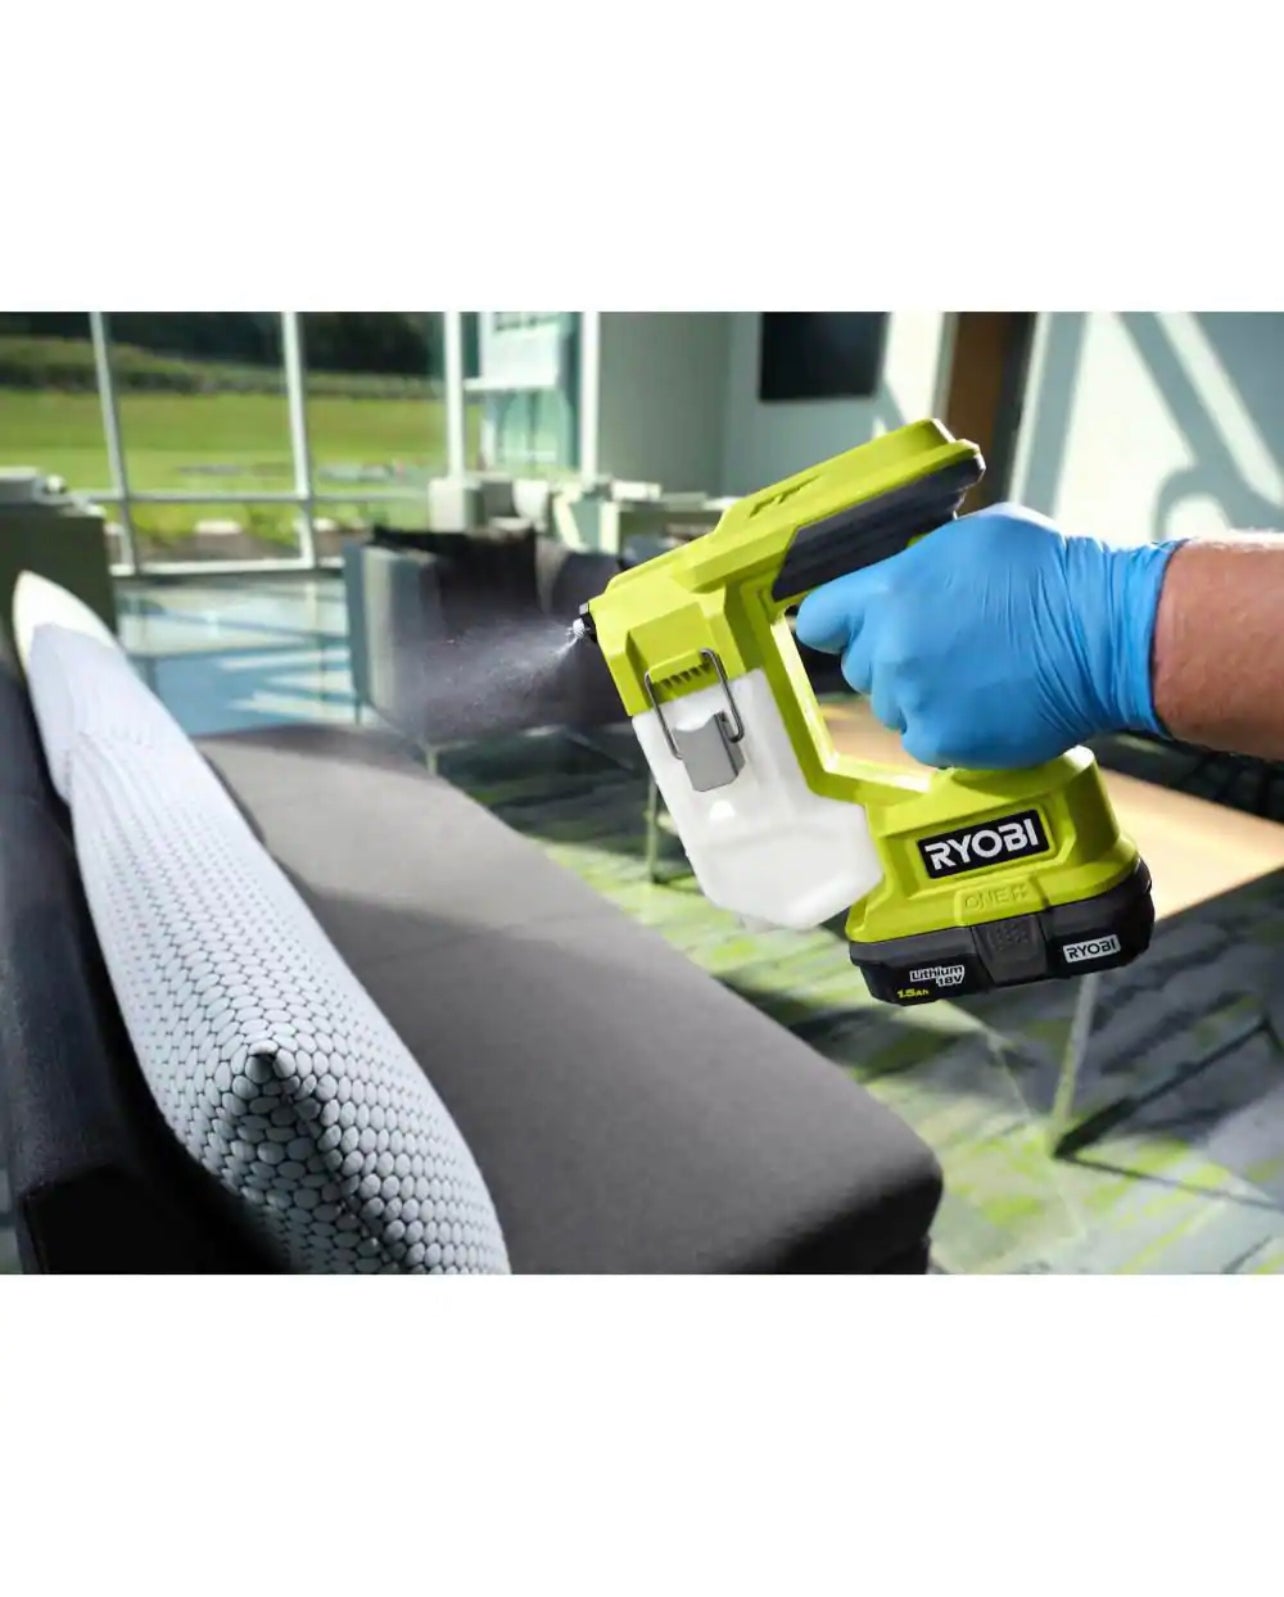 RYOBI P321-P326 ONE+ 18V Cordless 2-Tool Combo Kit with AirStrike 18-Gauge  Brad Nailer and 16-Gauge Straight Finish Nailer (Tools Only) –  Discounttoday.net